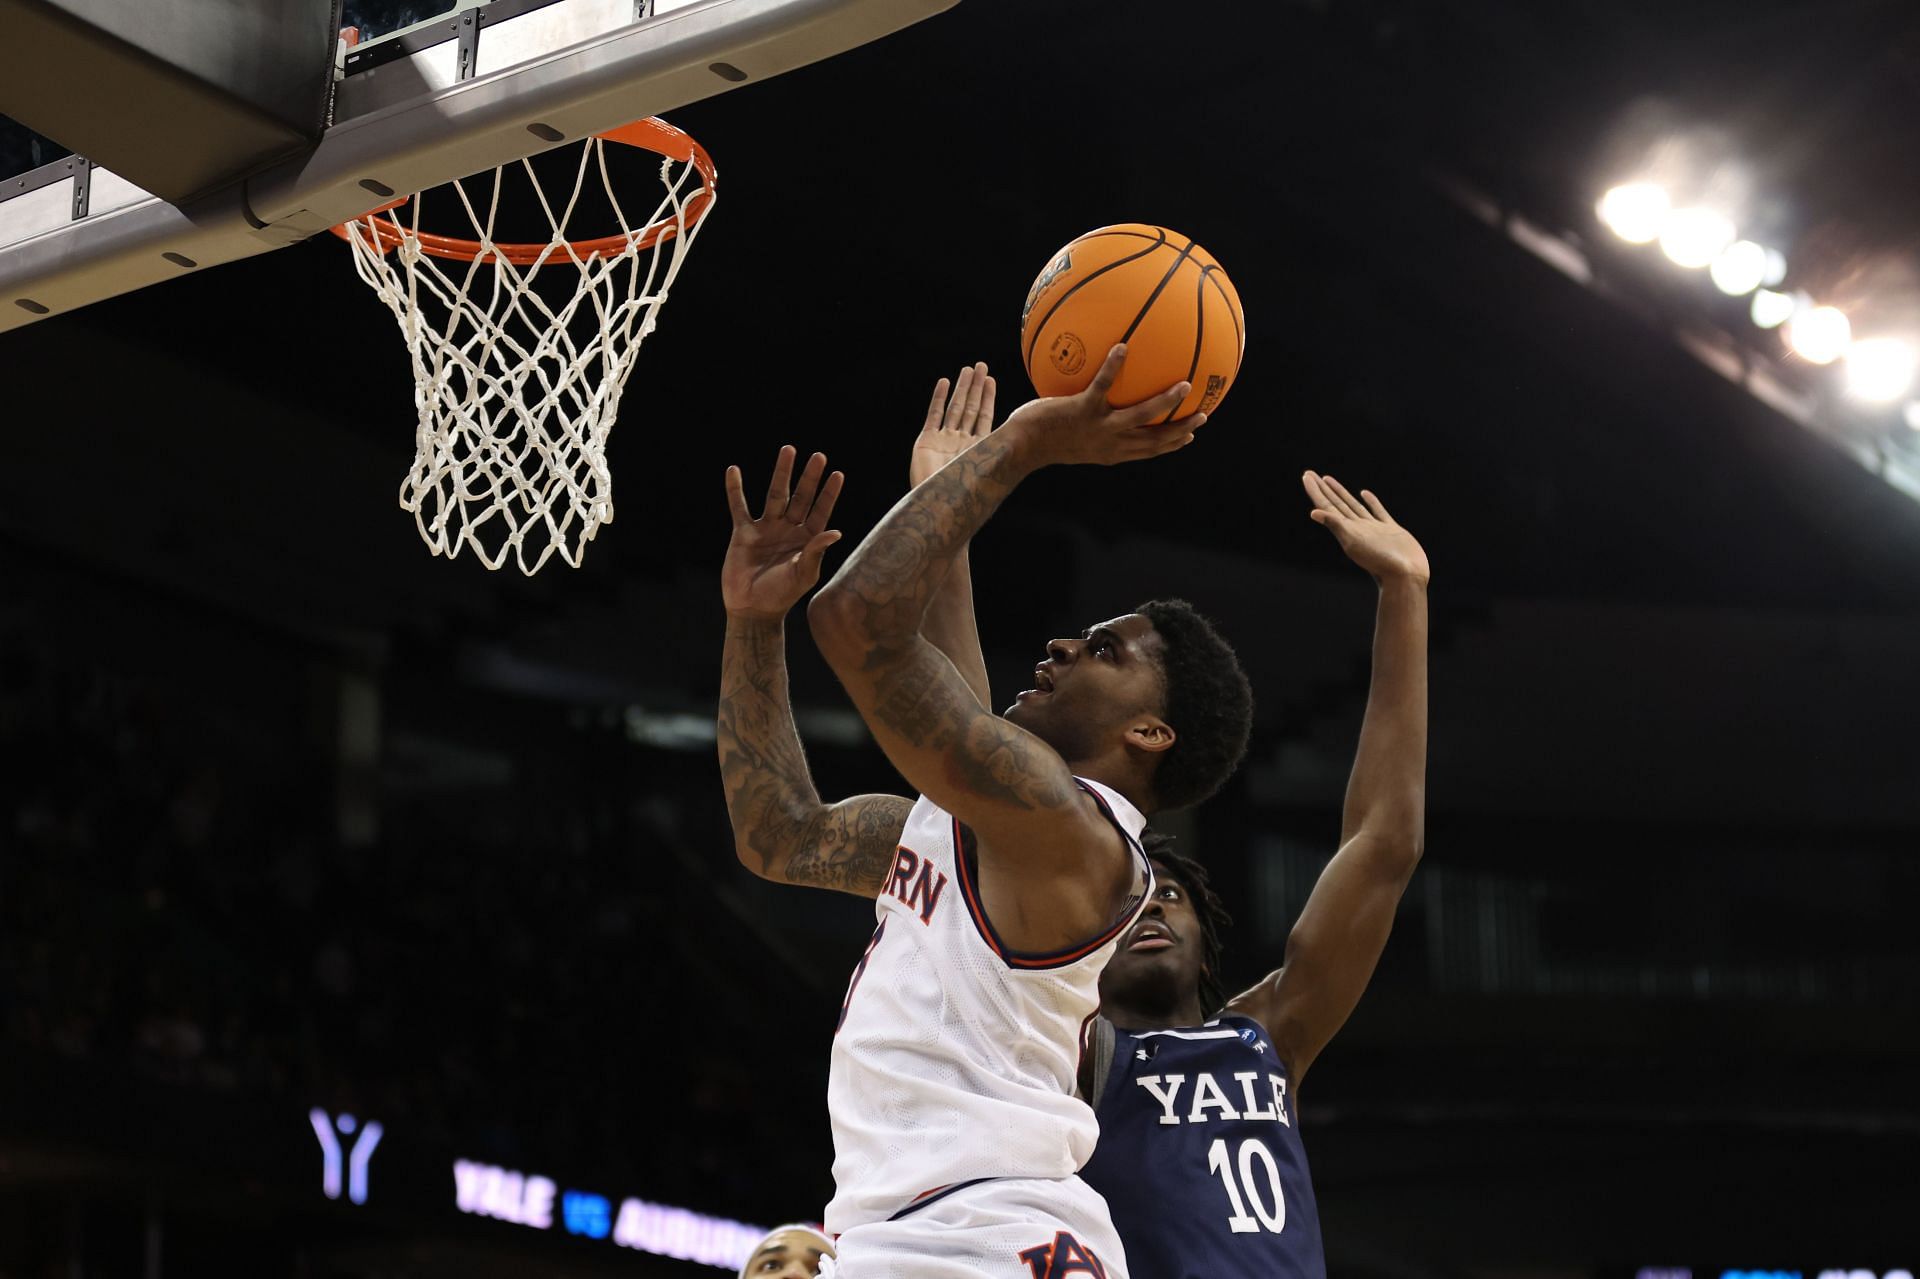 Auburn guard KD Johnson is in the transfer portal now, but might end up electing to return to the Tigers next season.